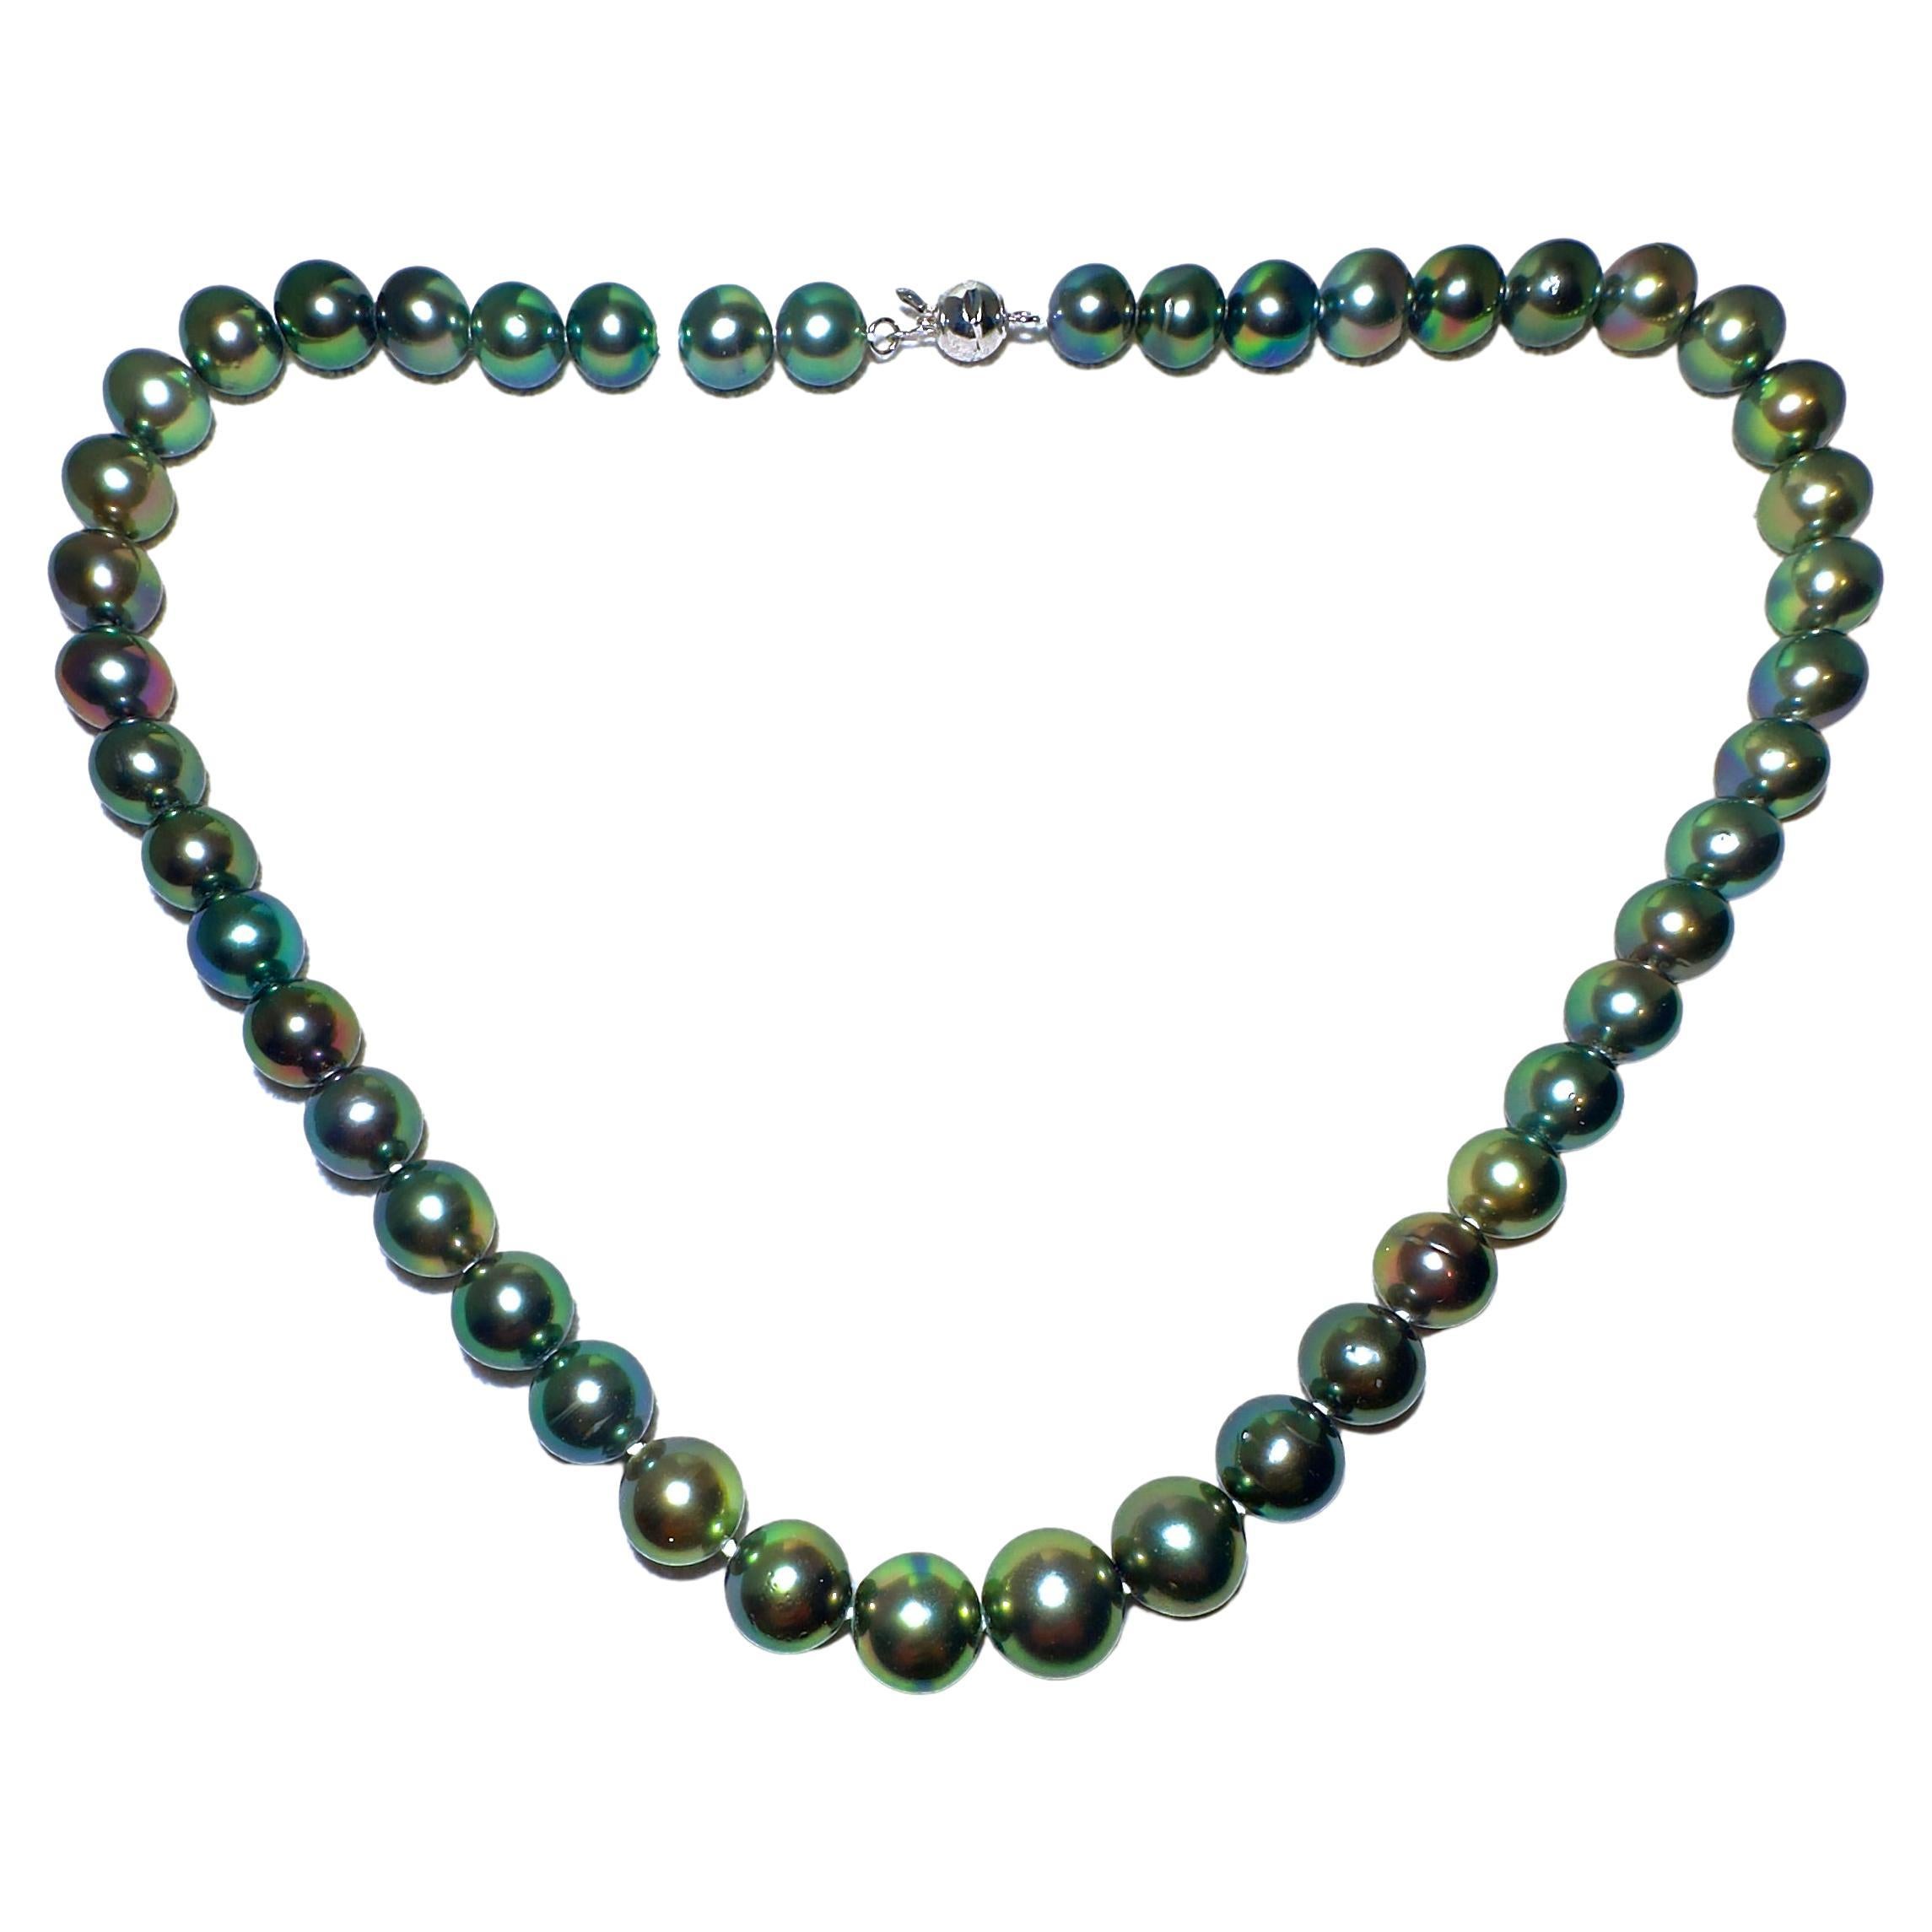 Eostre Black Tahitian Pearl Strand Necklace with 18k Clasp For Sale